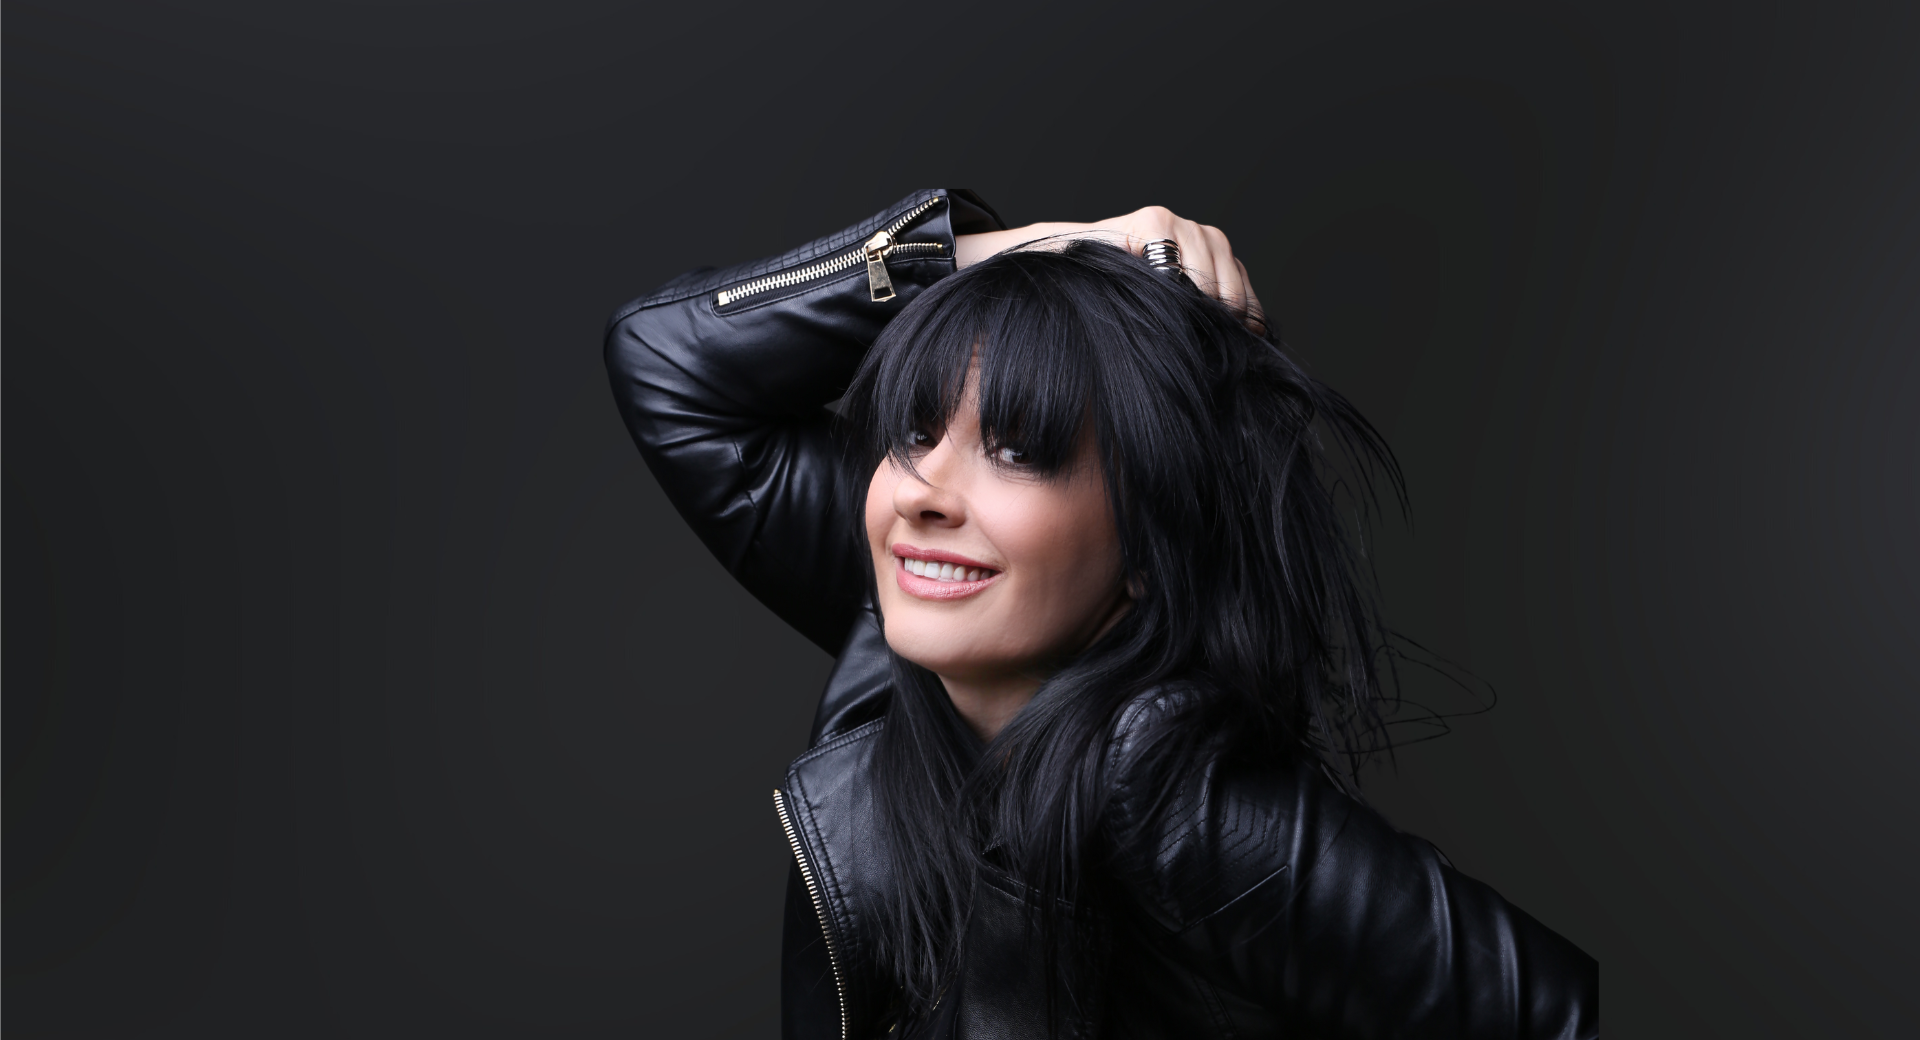 Portrait of woman in black leather jacket and dark hair